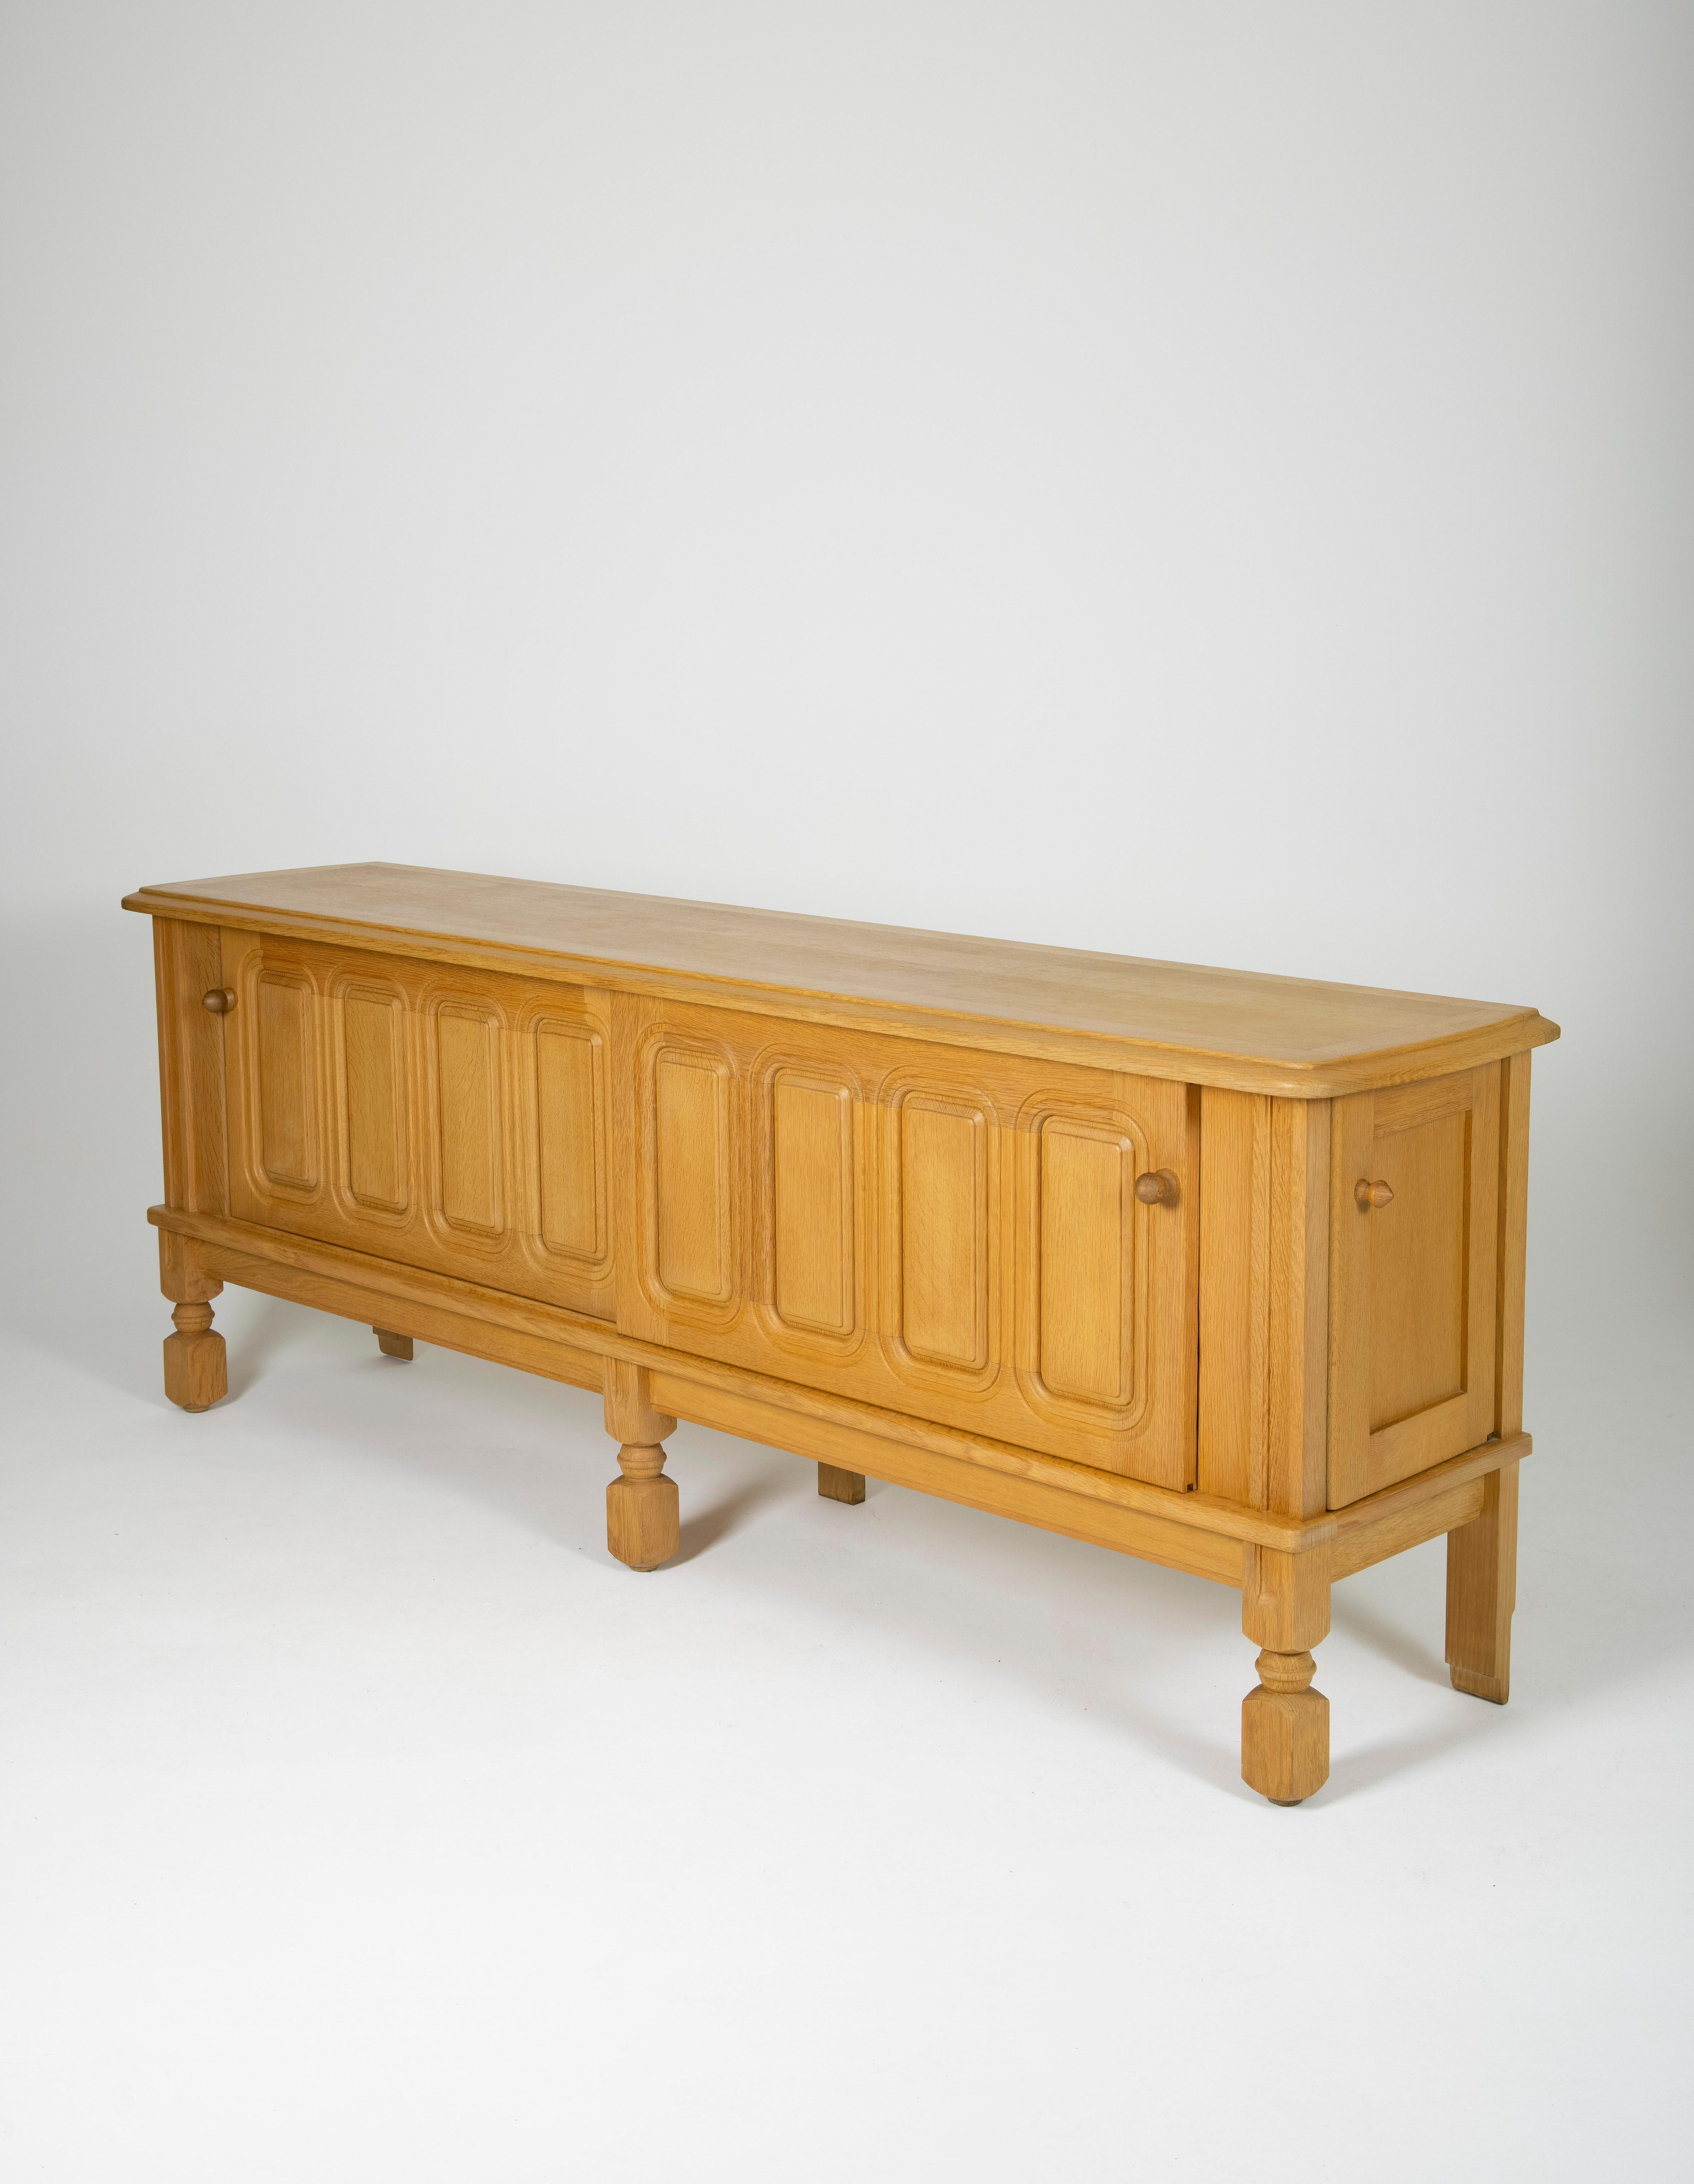 Solid oak sideboard by Robert Guillerme & jacques chambron produced in france in the 1960s. This sideboard has two sliding doors and four drawers on the right side. The sliding doors are worked with elegant carved patterns. Excellent condition.
LP581